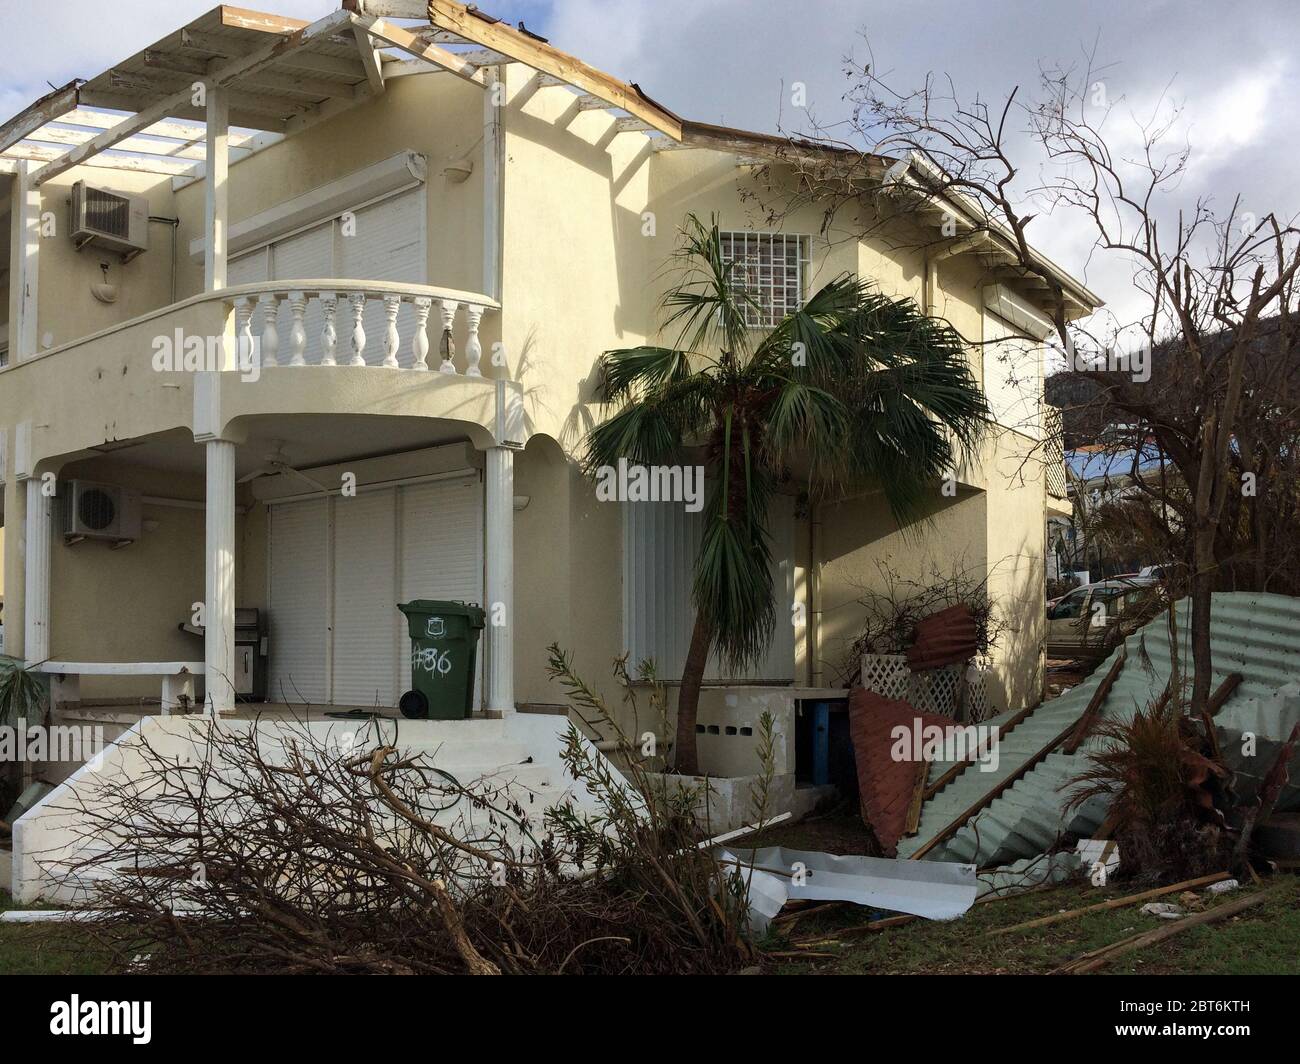 Debris after a category 5 storm: while shutters remained, Hurricane Irma took off most of the roof of this home in Sint Maarten causing major damage Stock Photo